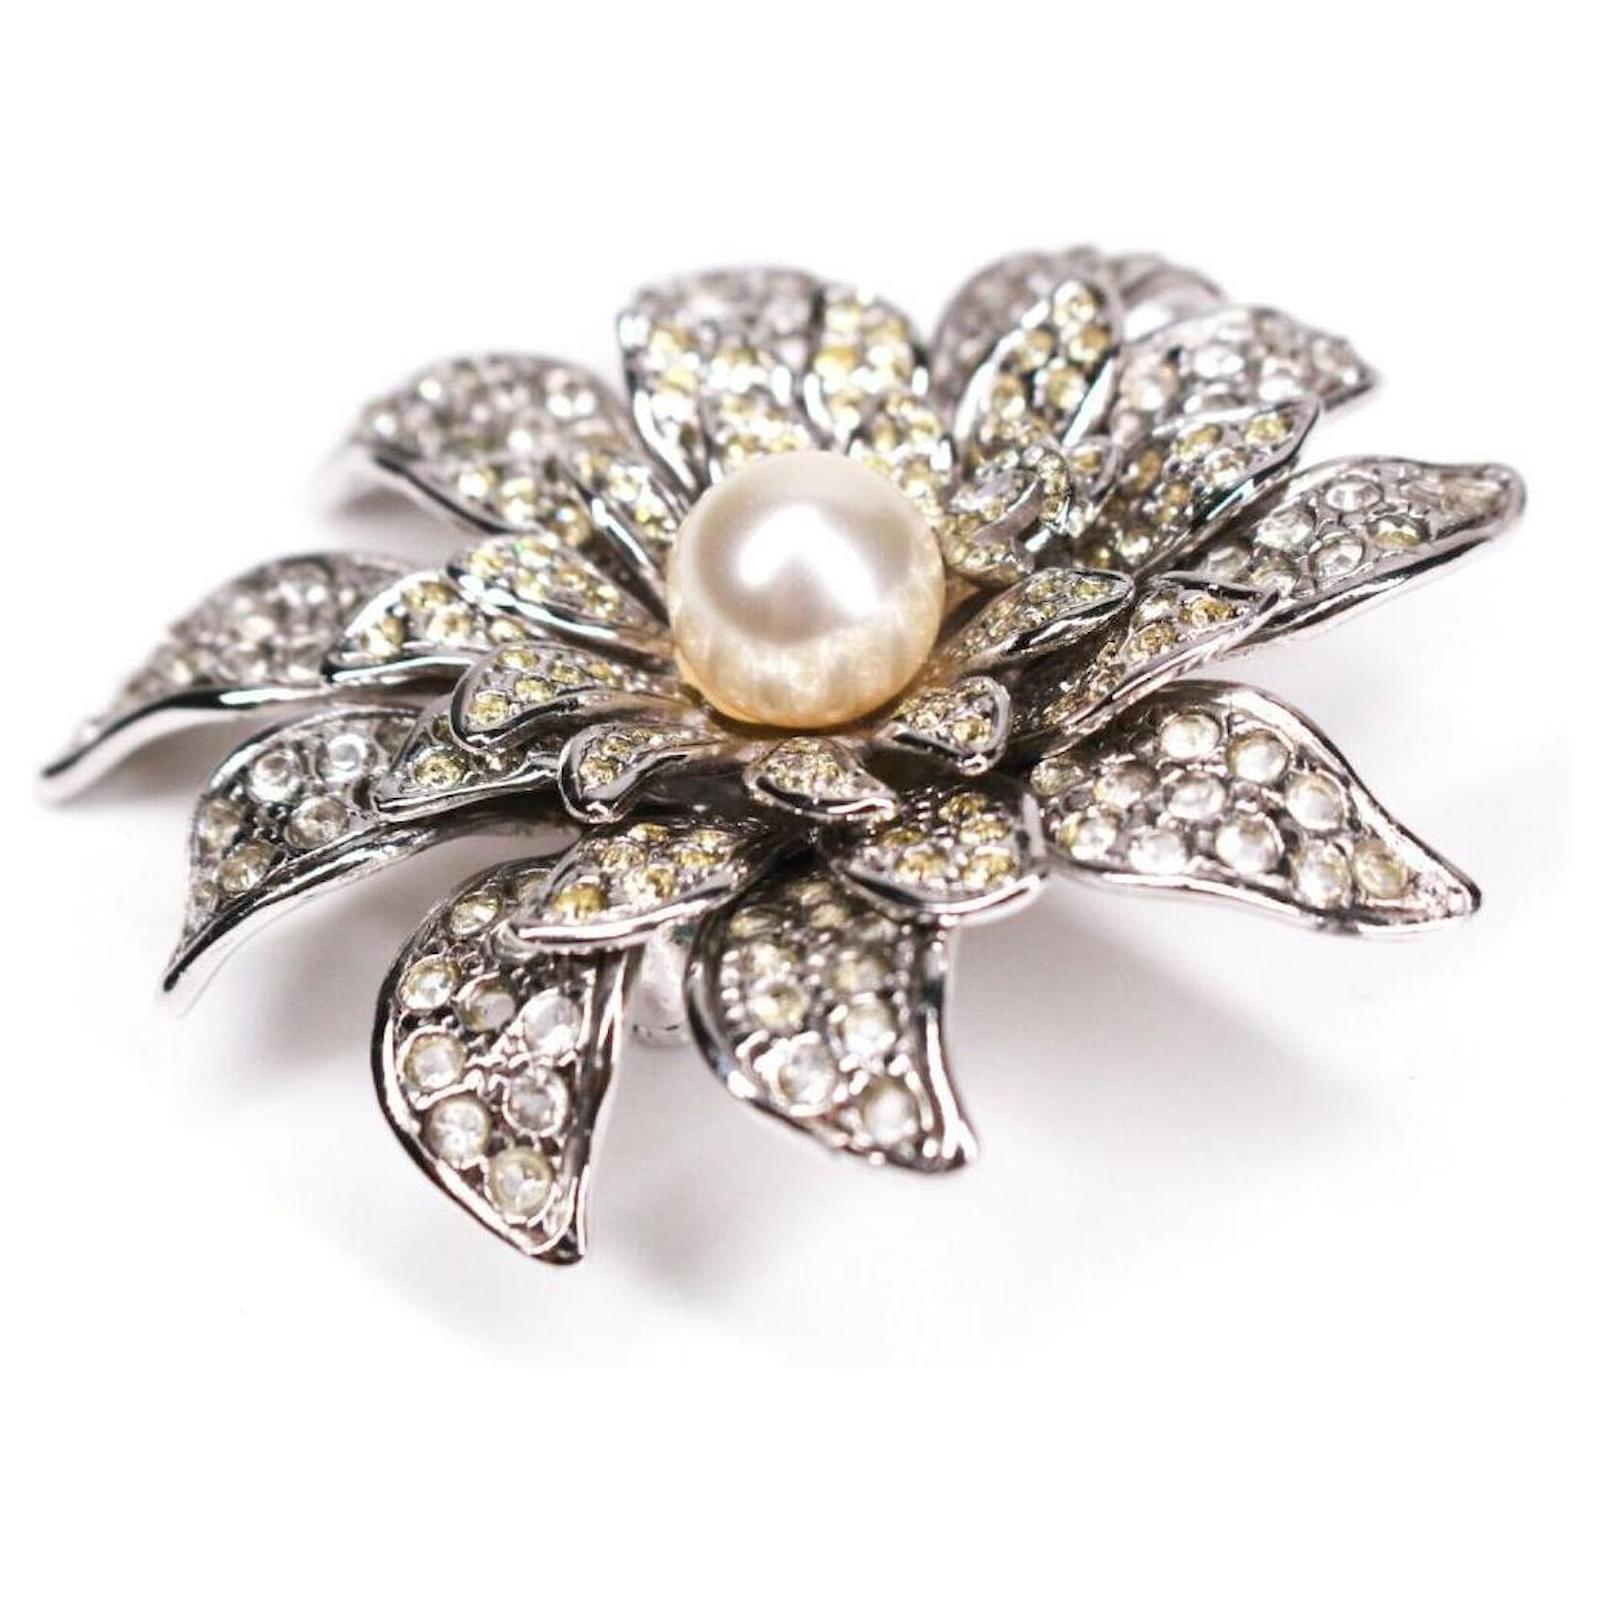 Chanel 05a 2005 Fall Crystal Flower Pin Brooch Silver Metal with Center ...